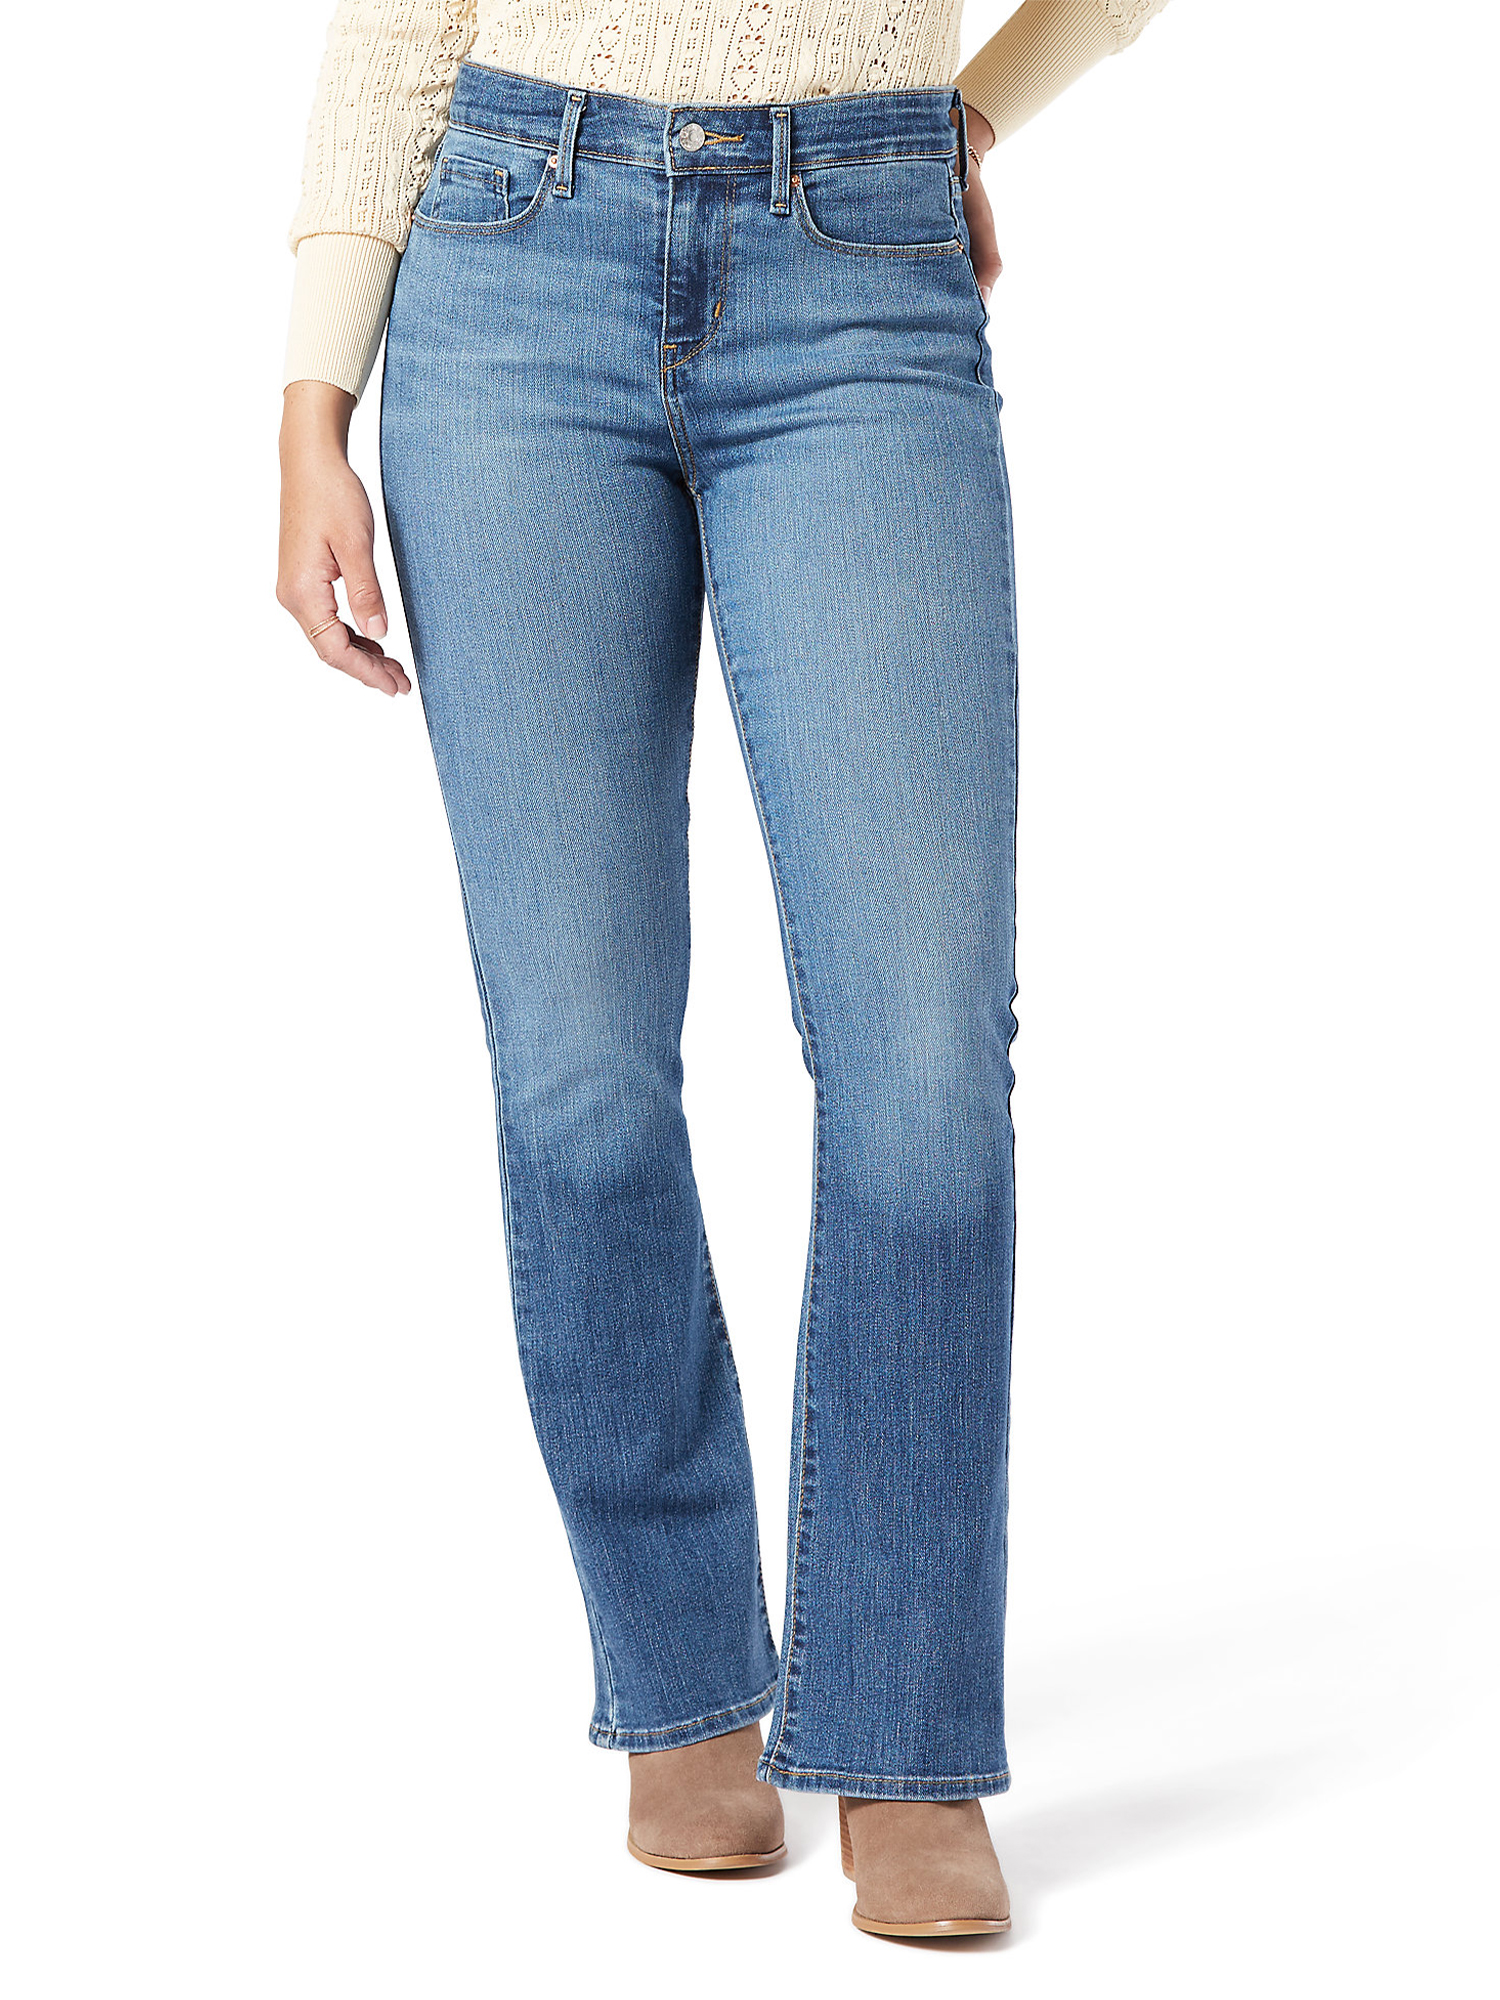 Signature by Levi Strauss & Co. Women's and Women's Plus Modern Bootcut Jeans - image 1 of 7